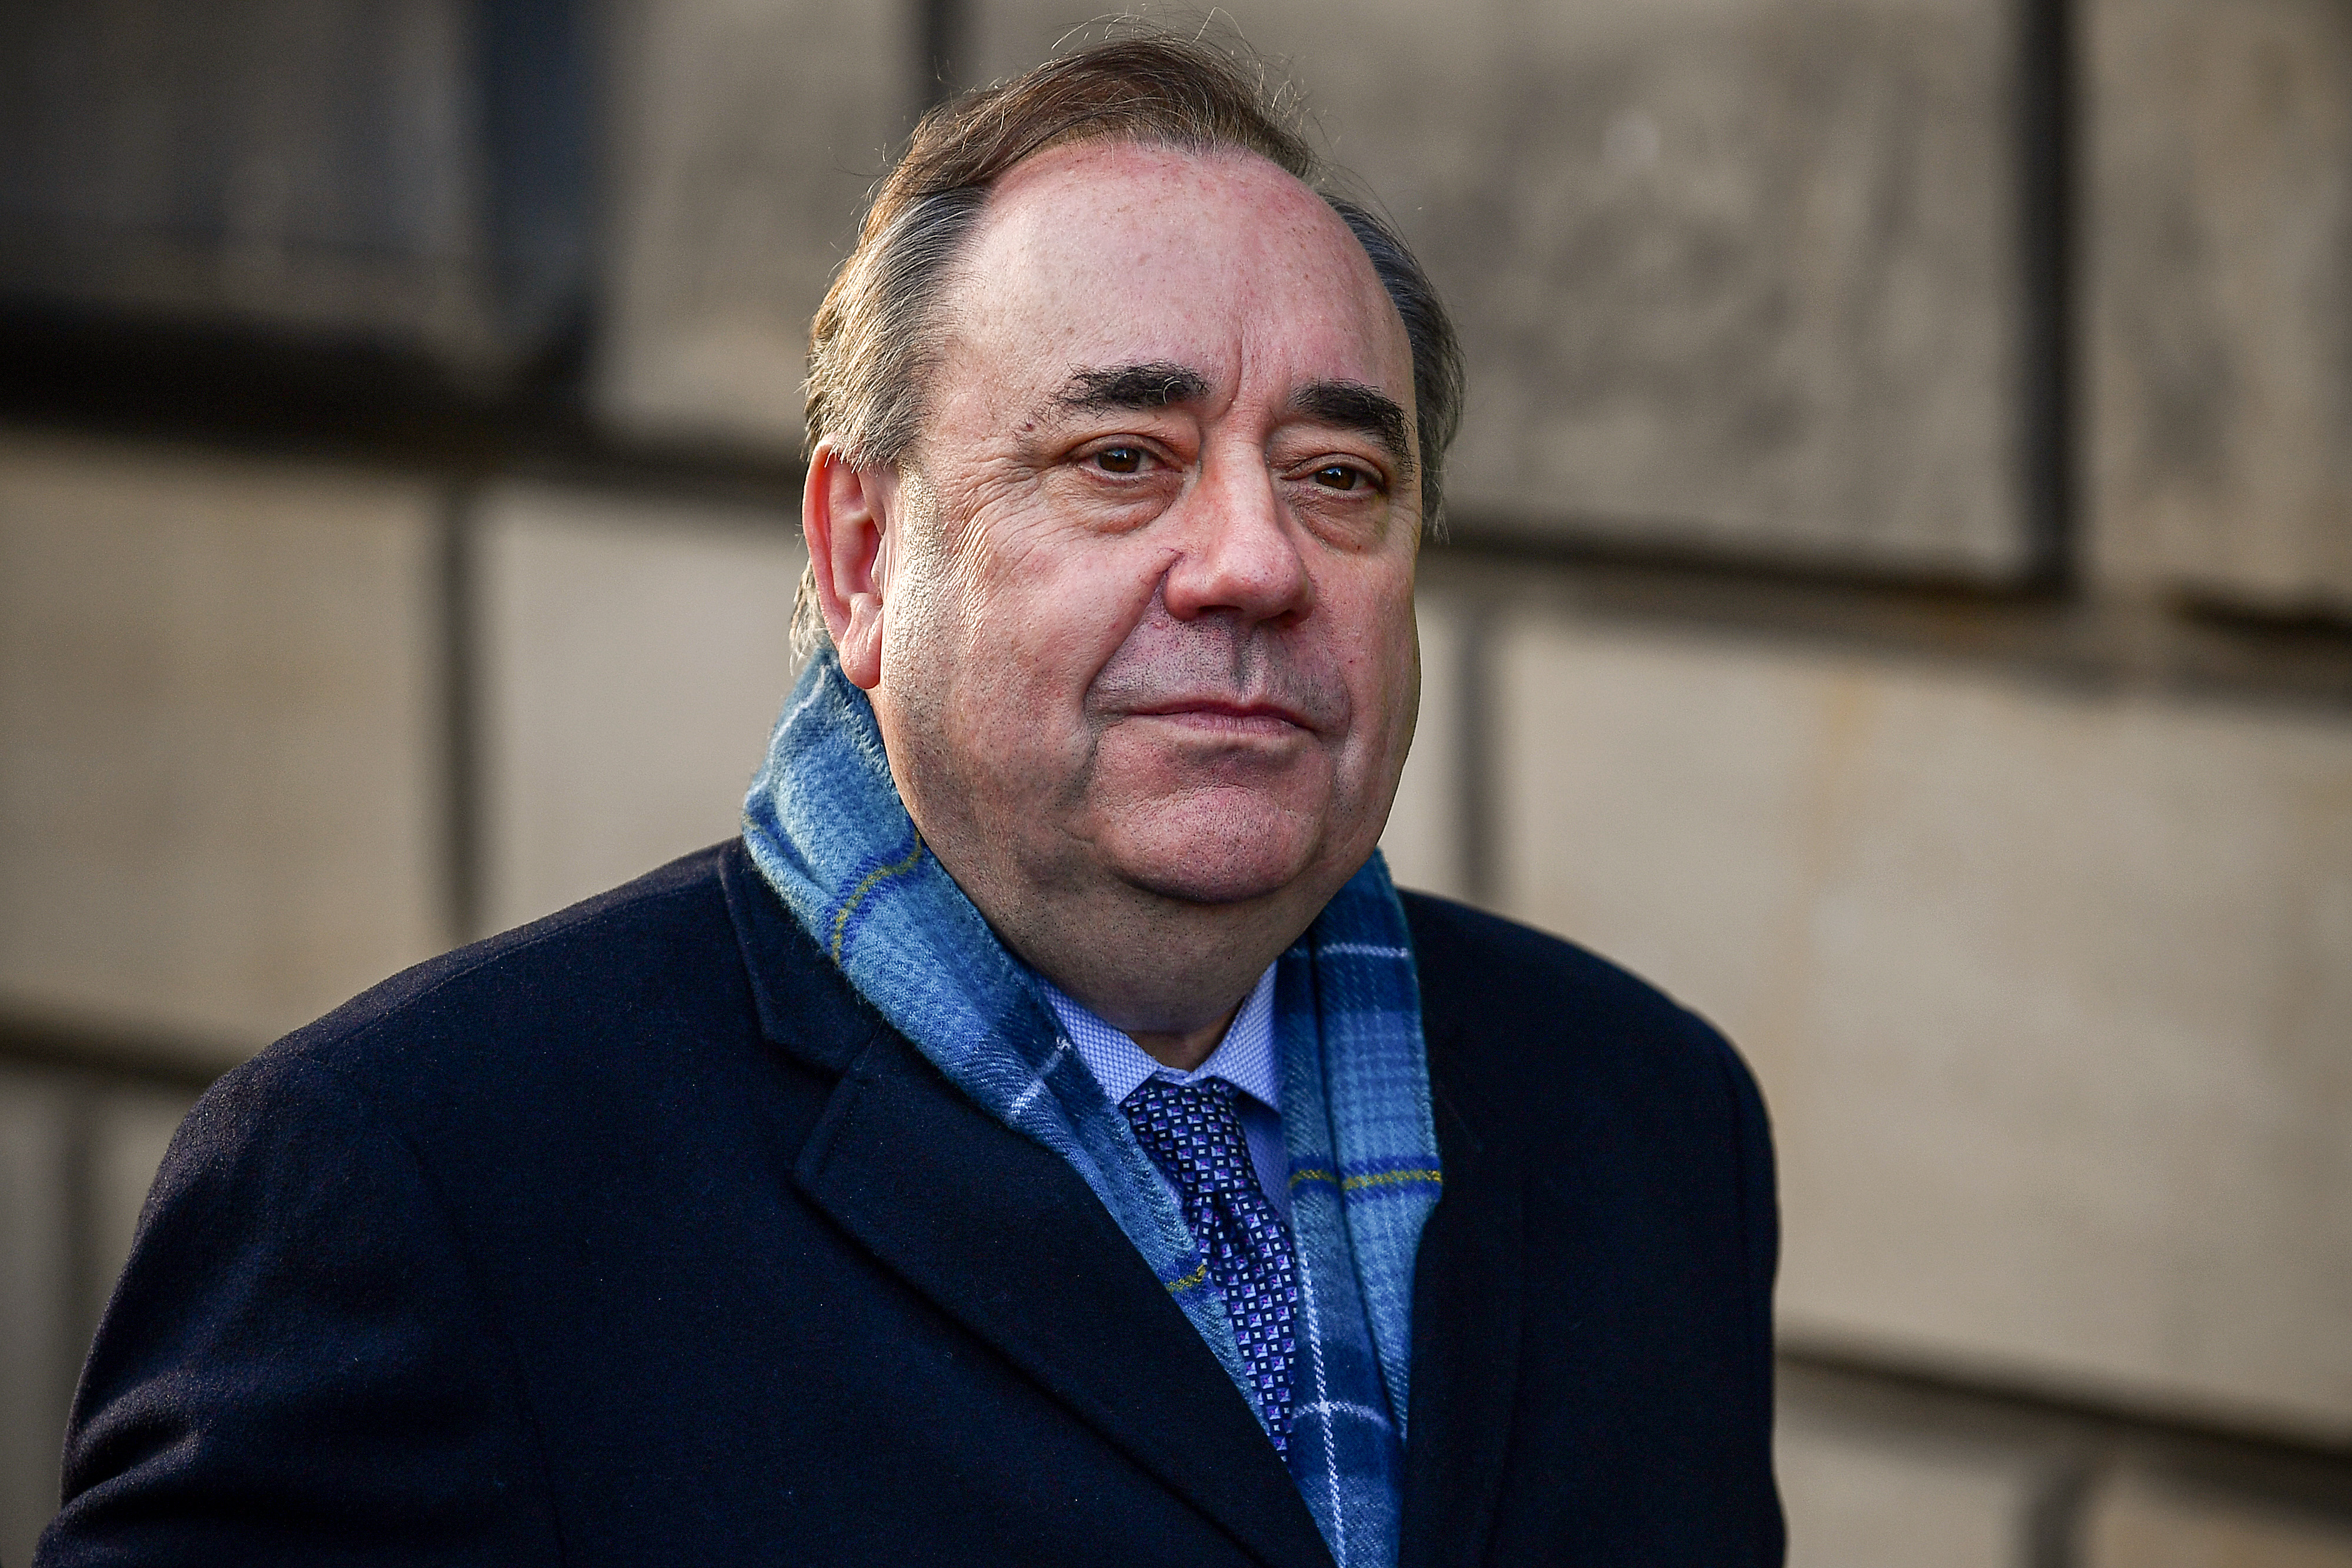 Alex Salmond Alba Party has gained a new councillor.